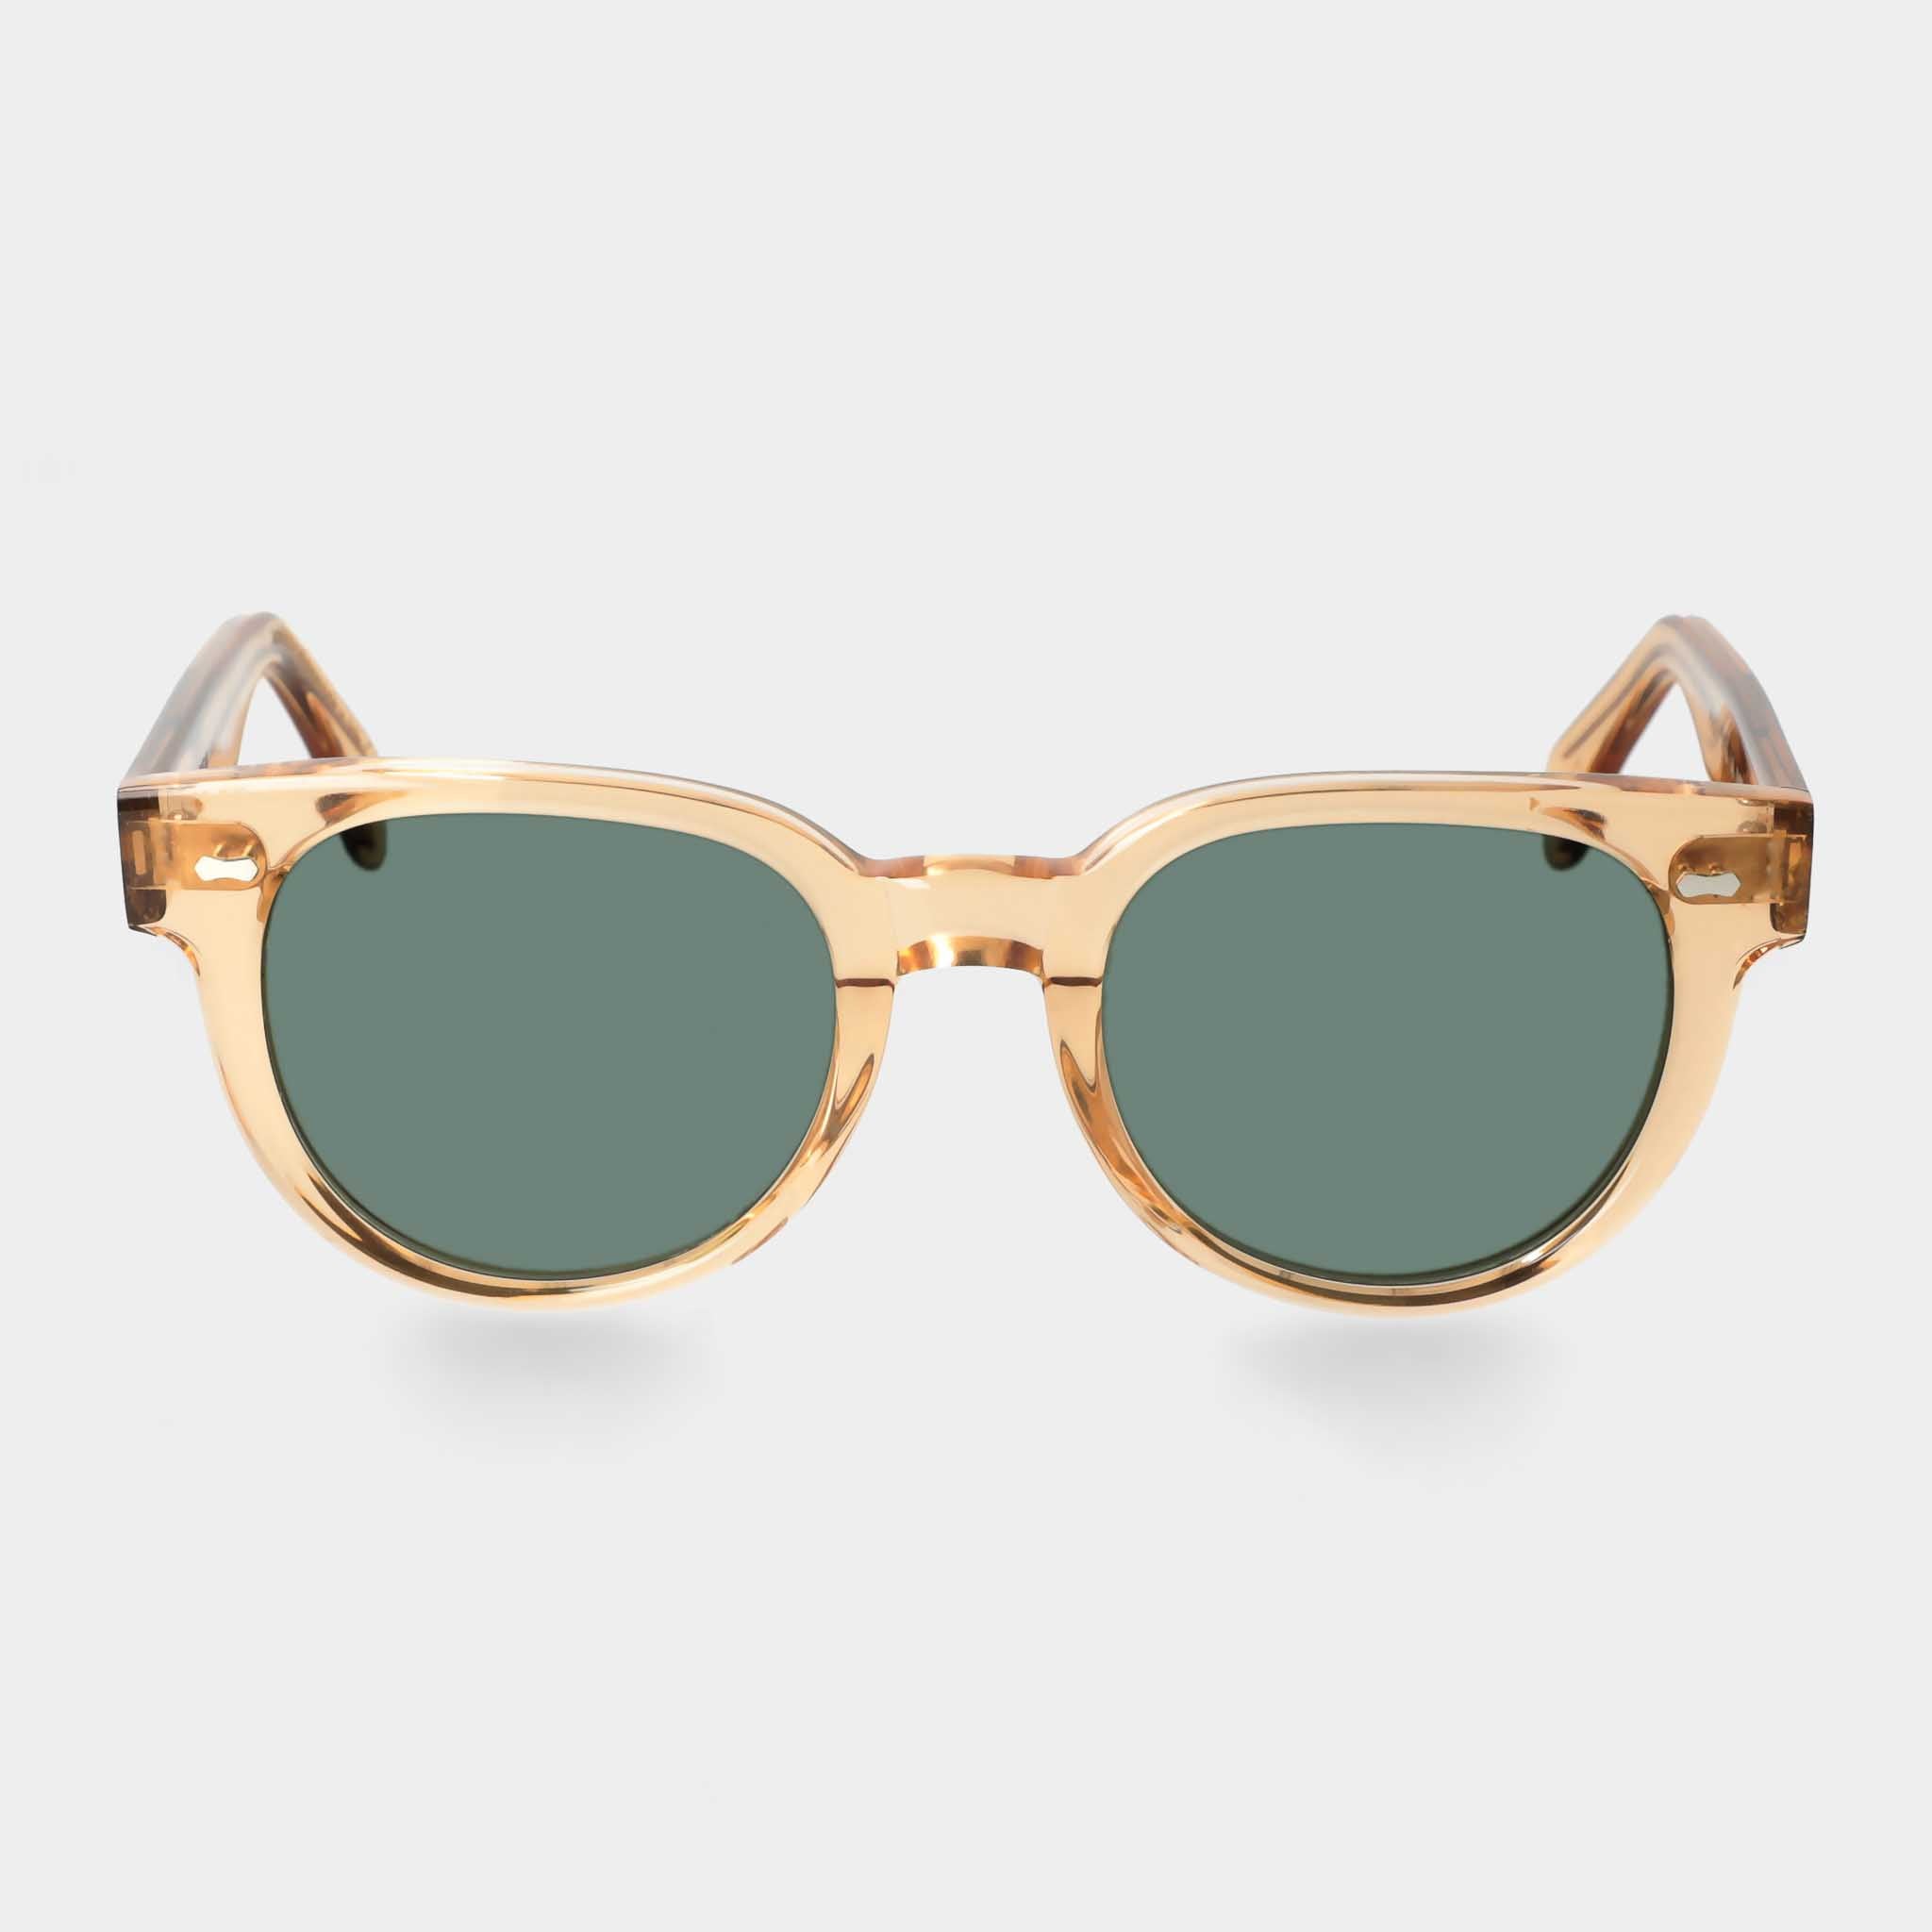 sunglasses-palm-eco-champagne-bottle-green-sustainable-tbd-eyewear-front